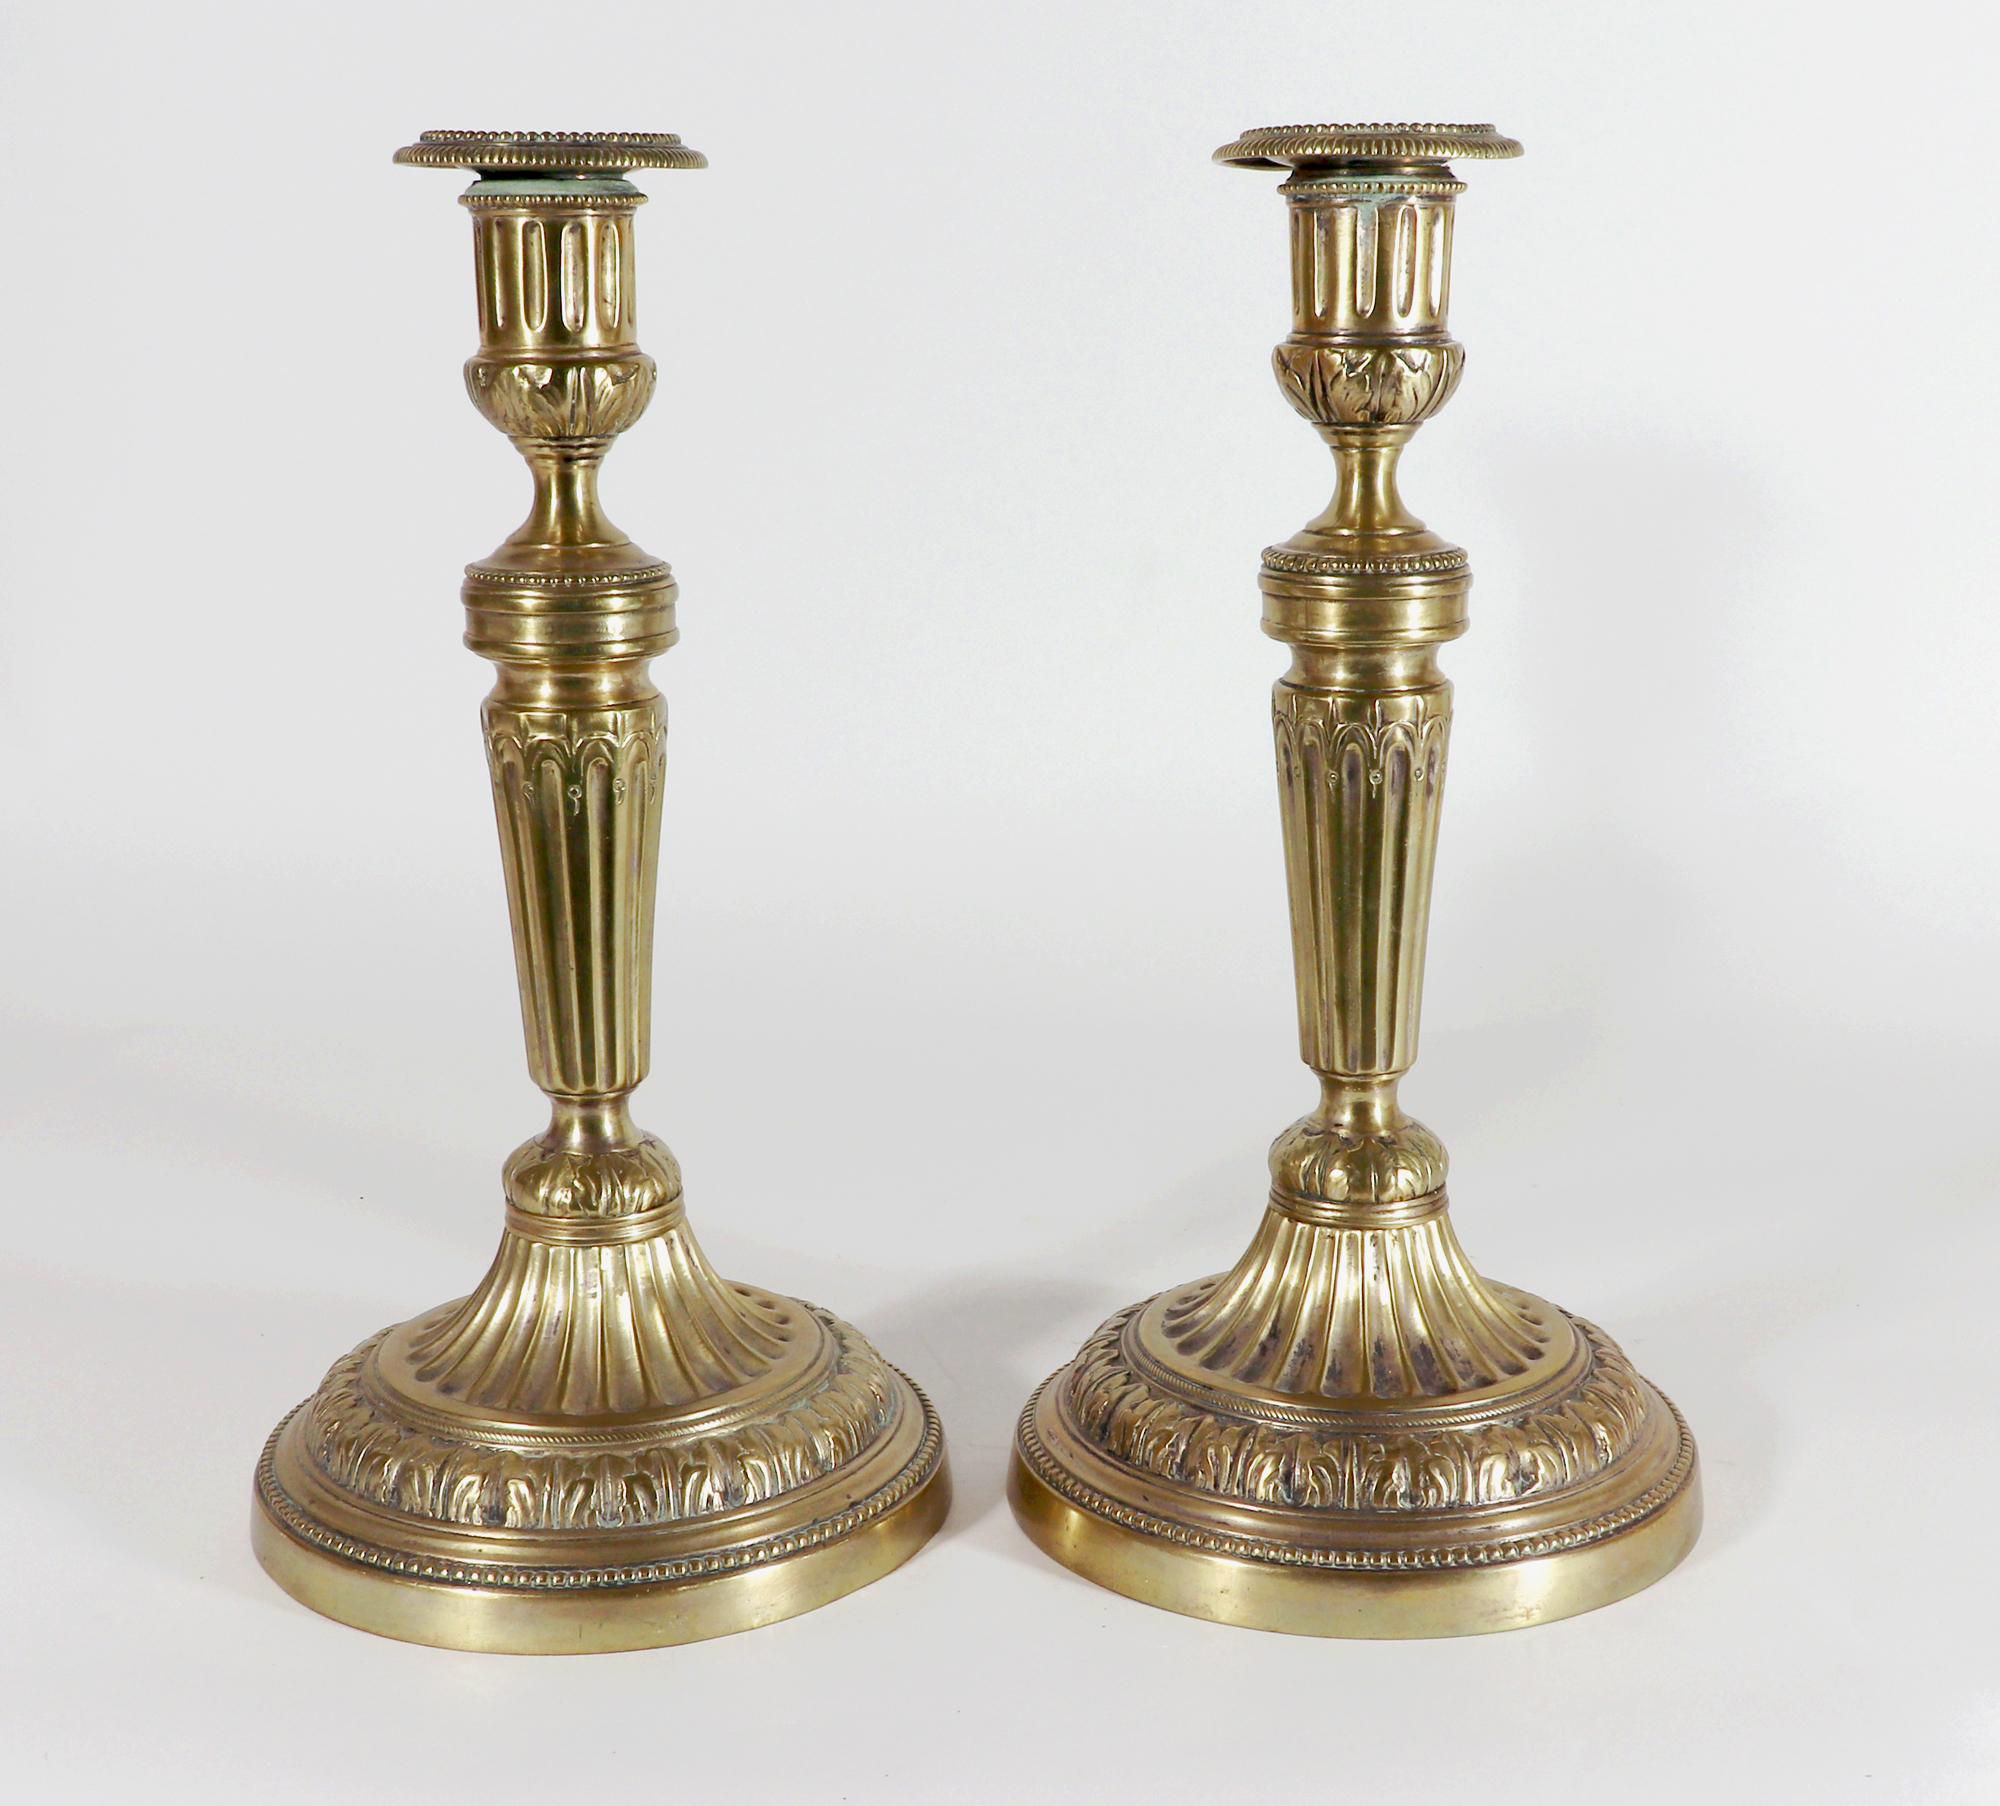 Stylish French Brass Candlesticks,
Circa 1780

The large French brass candlesticks are of circular form each with a hollow base and fluted column.  Each with a detachable nozzle.  The candlesticks have a good heavy weight.  The hollow foot is flared